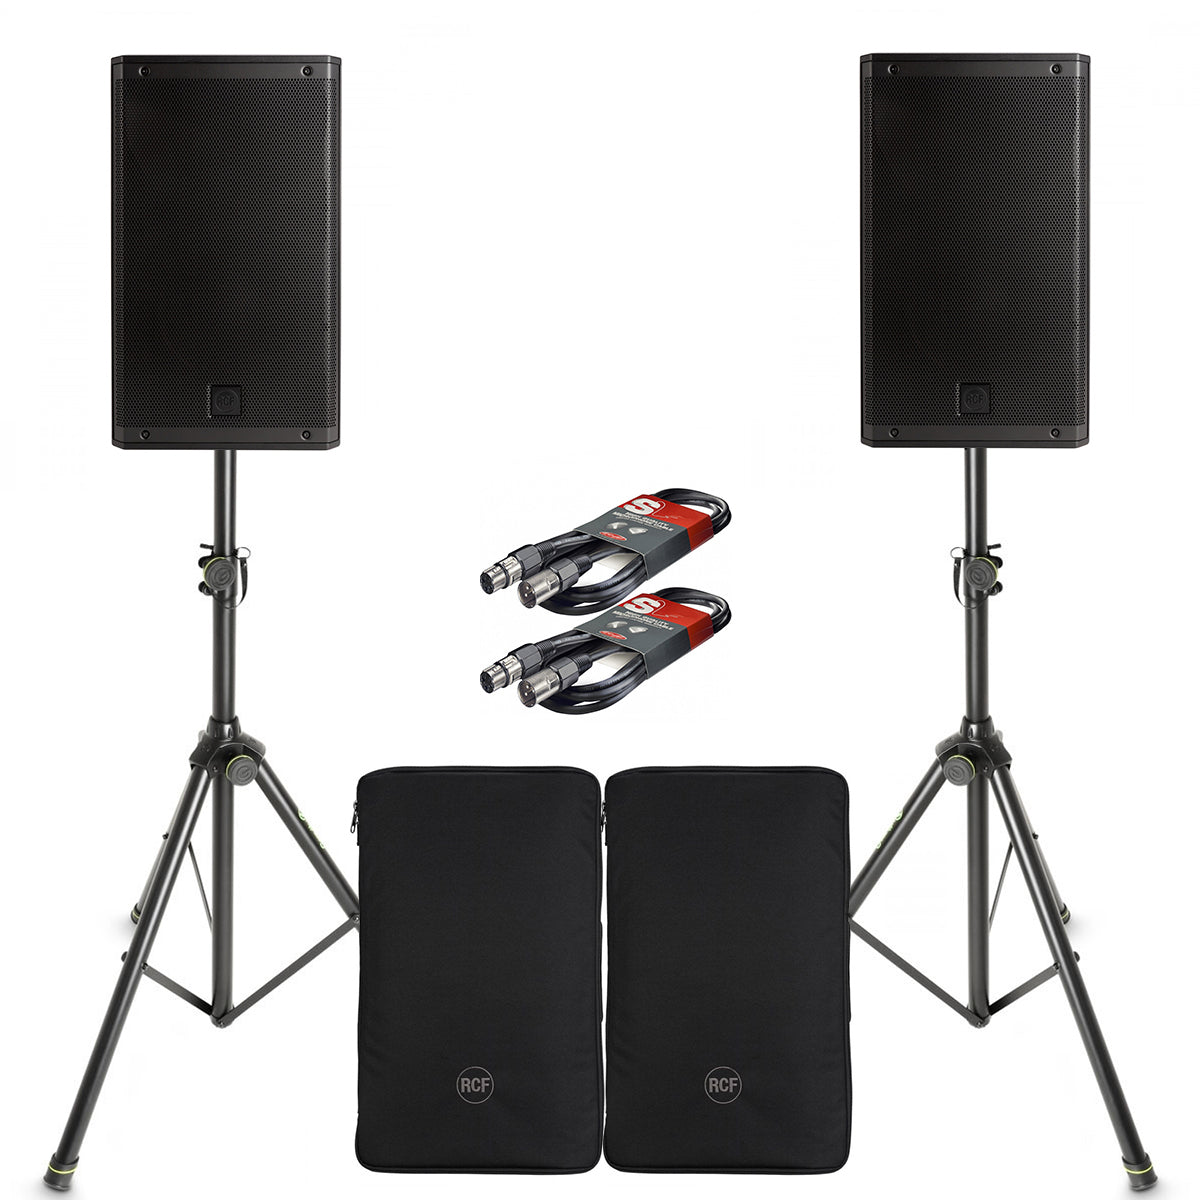 RCF ART 910-A Pair with Covers, Stands & Cables